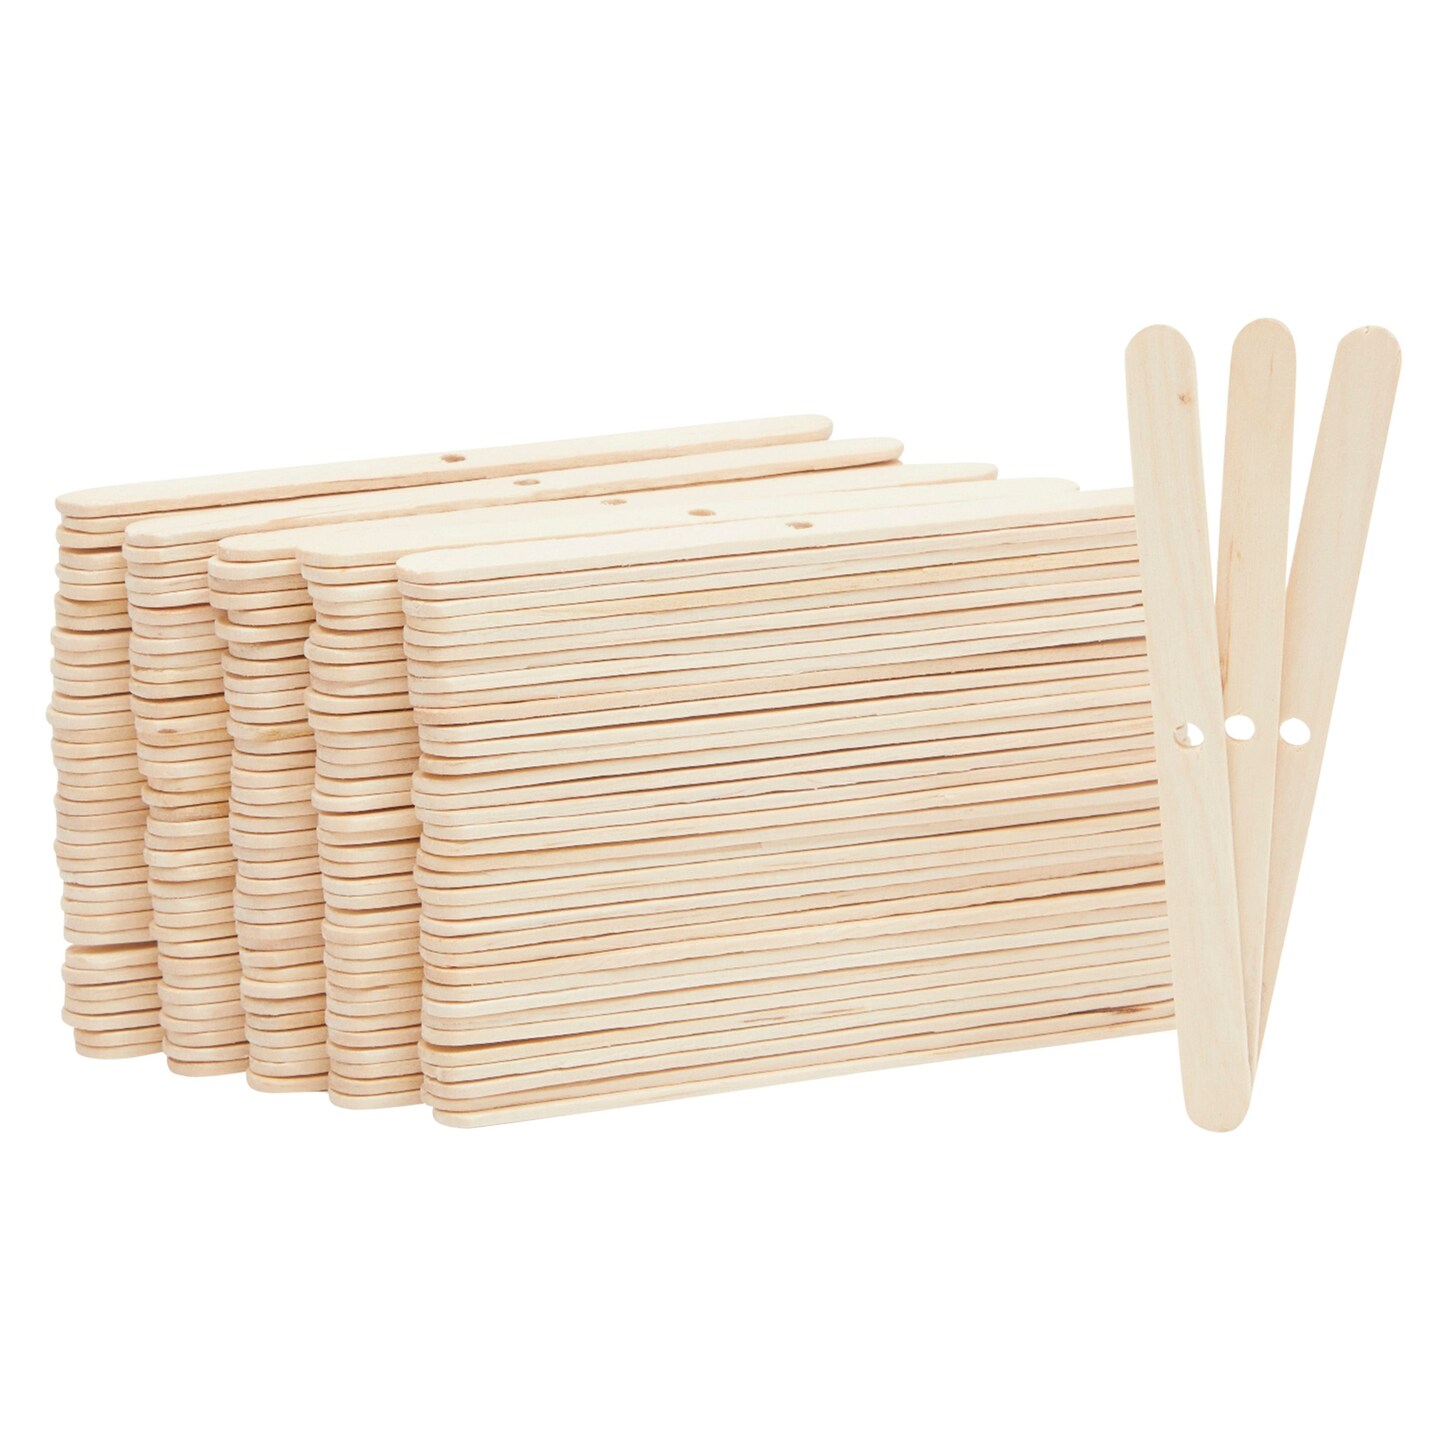 100 PCS Wooden Candle Wick Holders 7inch Candle Wick Bars 7 Holes Candle  Wick Holder Clips Wick Clips Centering Tools Wick Holders for Large 